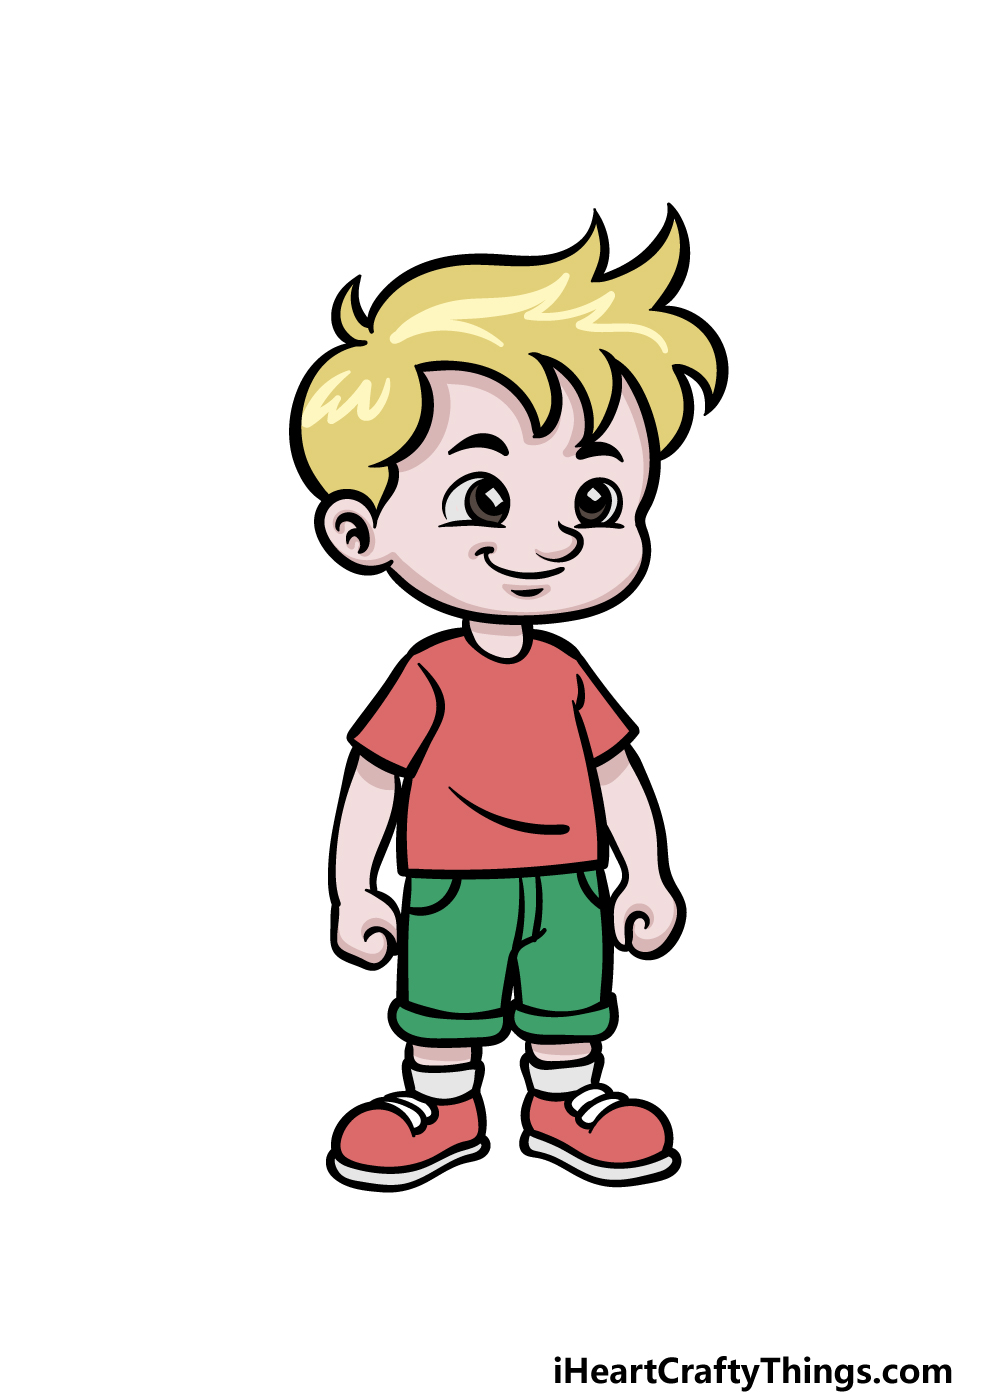 Illustration Of Cute Little Boy Download A Free Preview Or High Quality  Adobe Illustrator Ai, … Boy Cartoon Drawing, Cute Little Boys, Little Boy  Drawing 